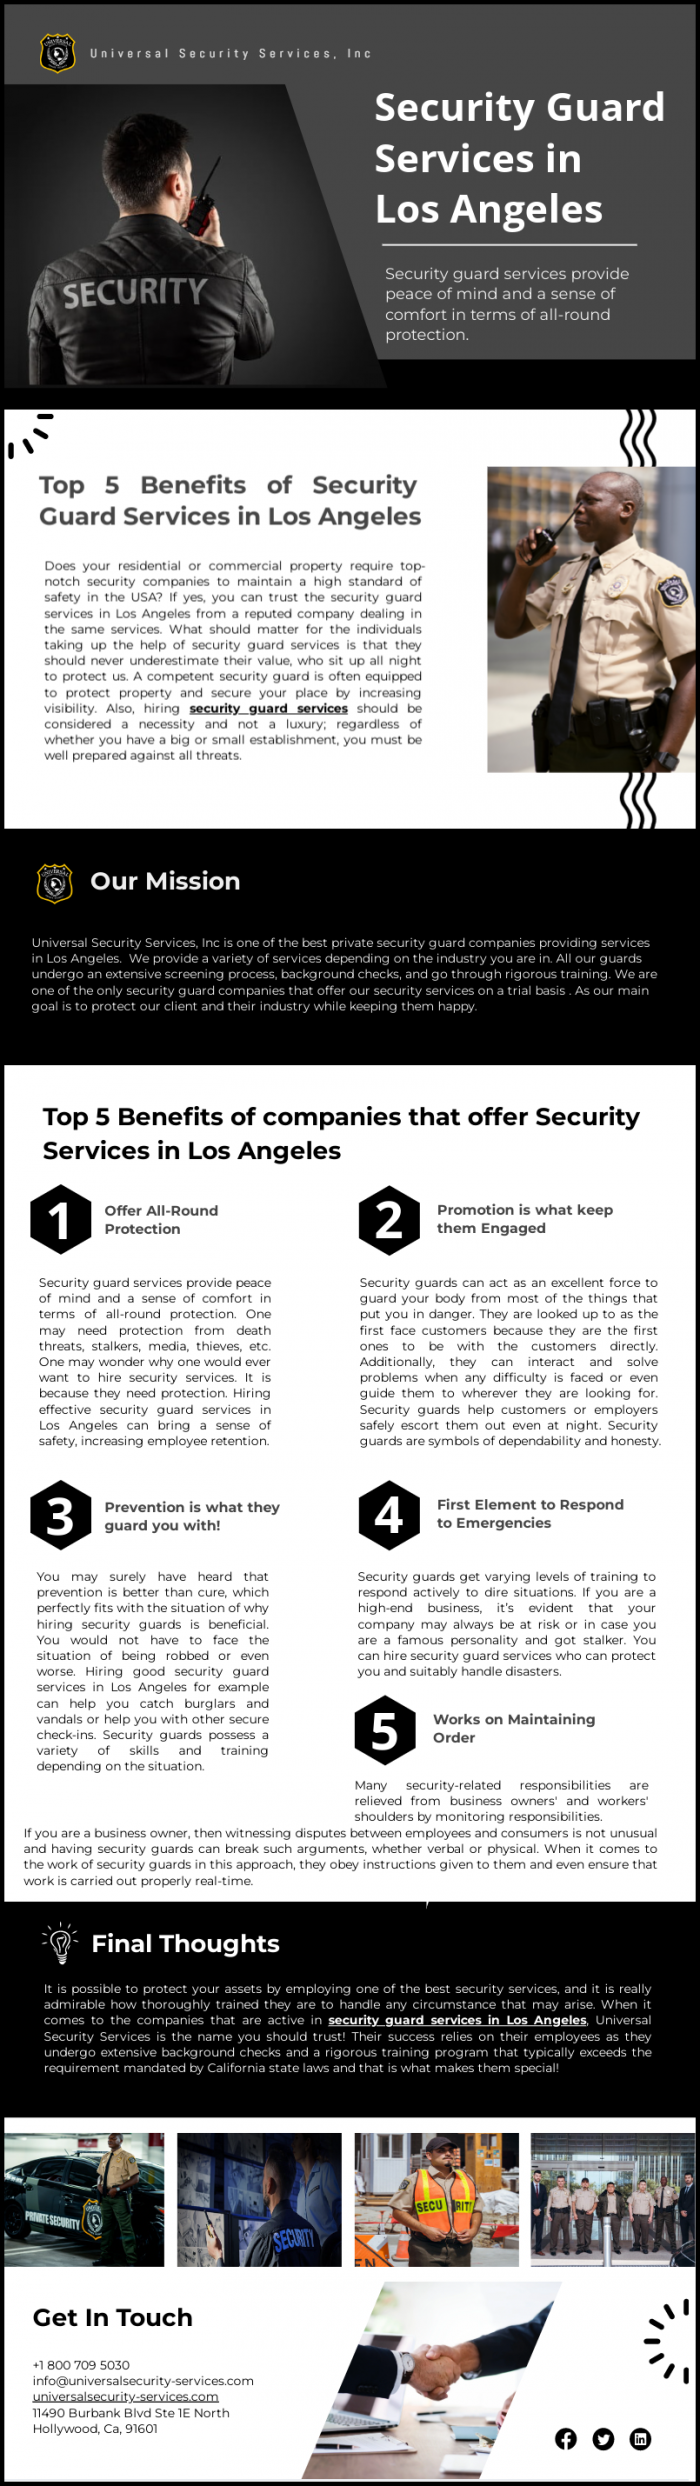 Top 5 Benefits of Security Guard Services in Los Angeles